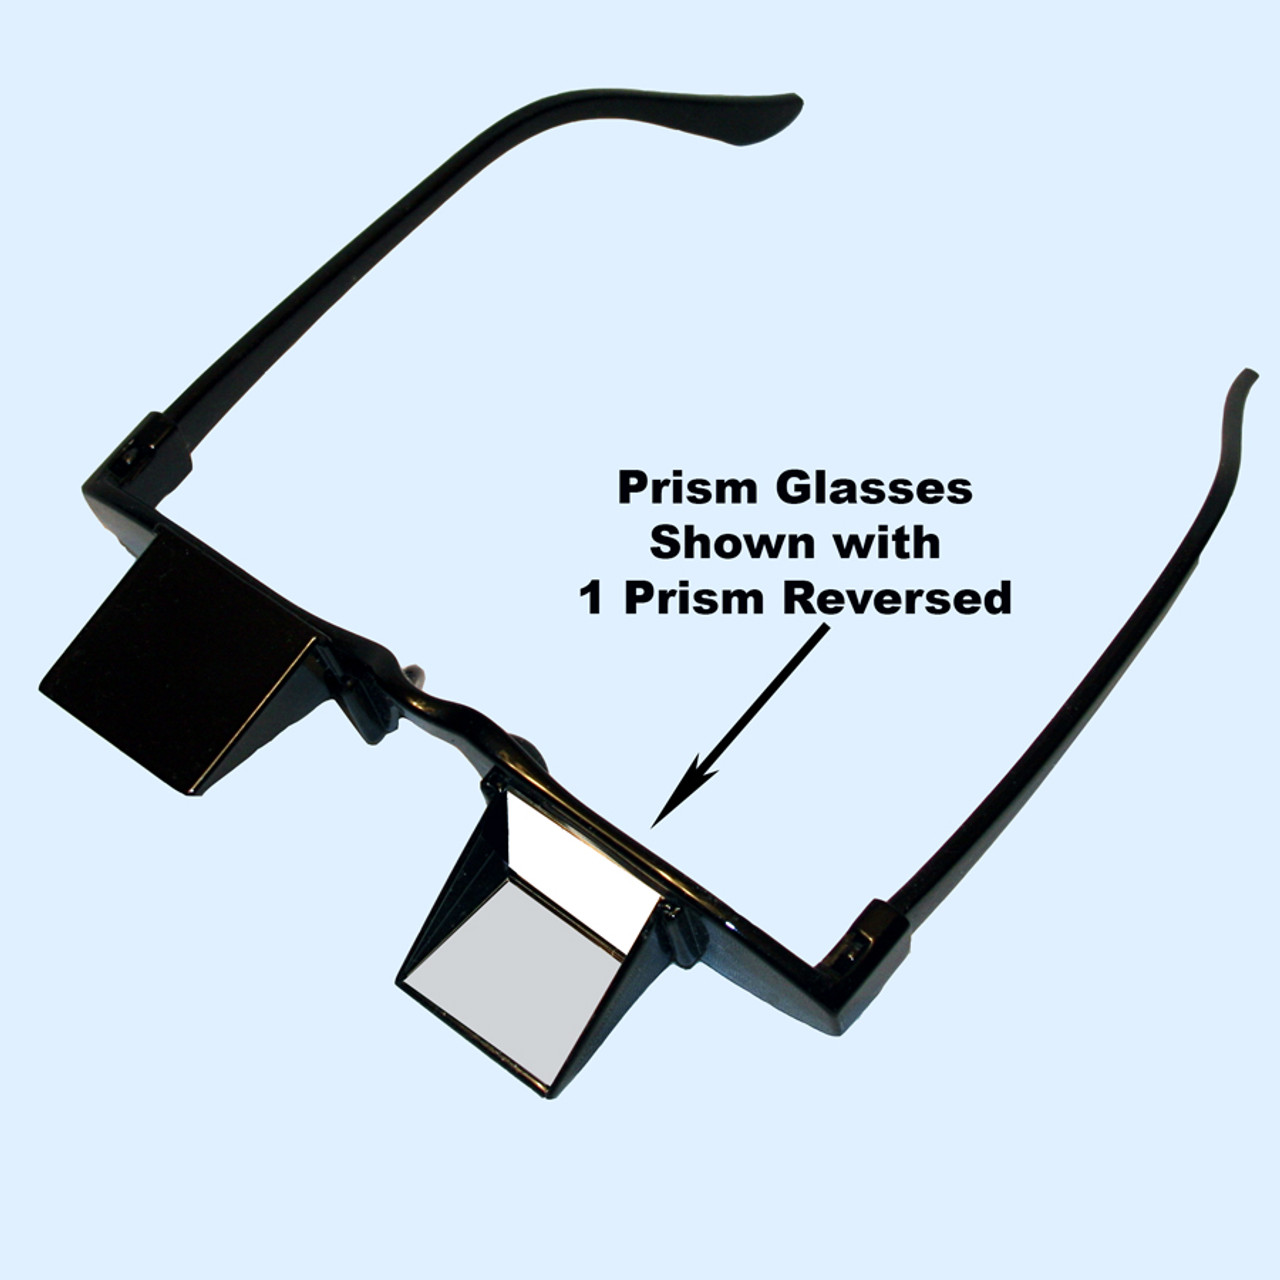 Vision USA Offers its Task Vision Professional Adjustable and Reversible Prism  Glasses